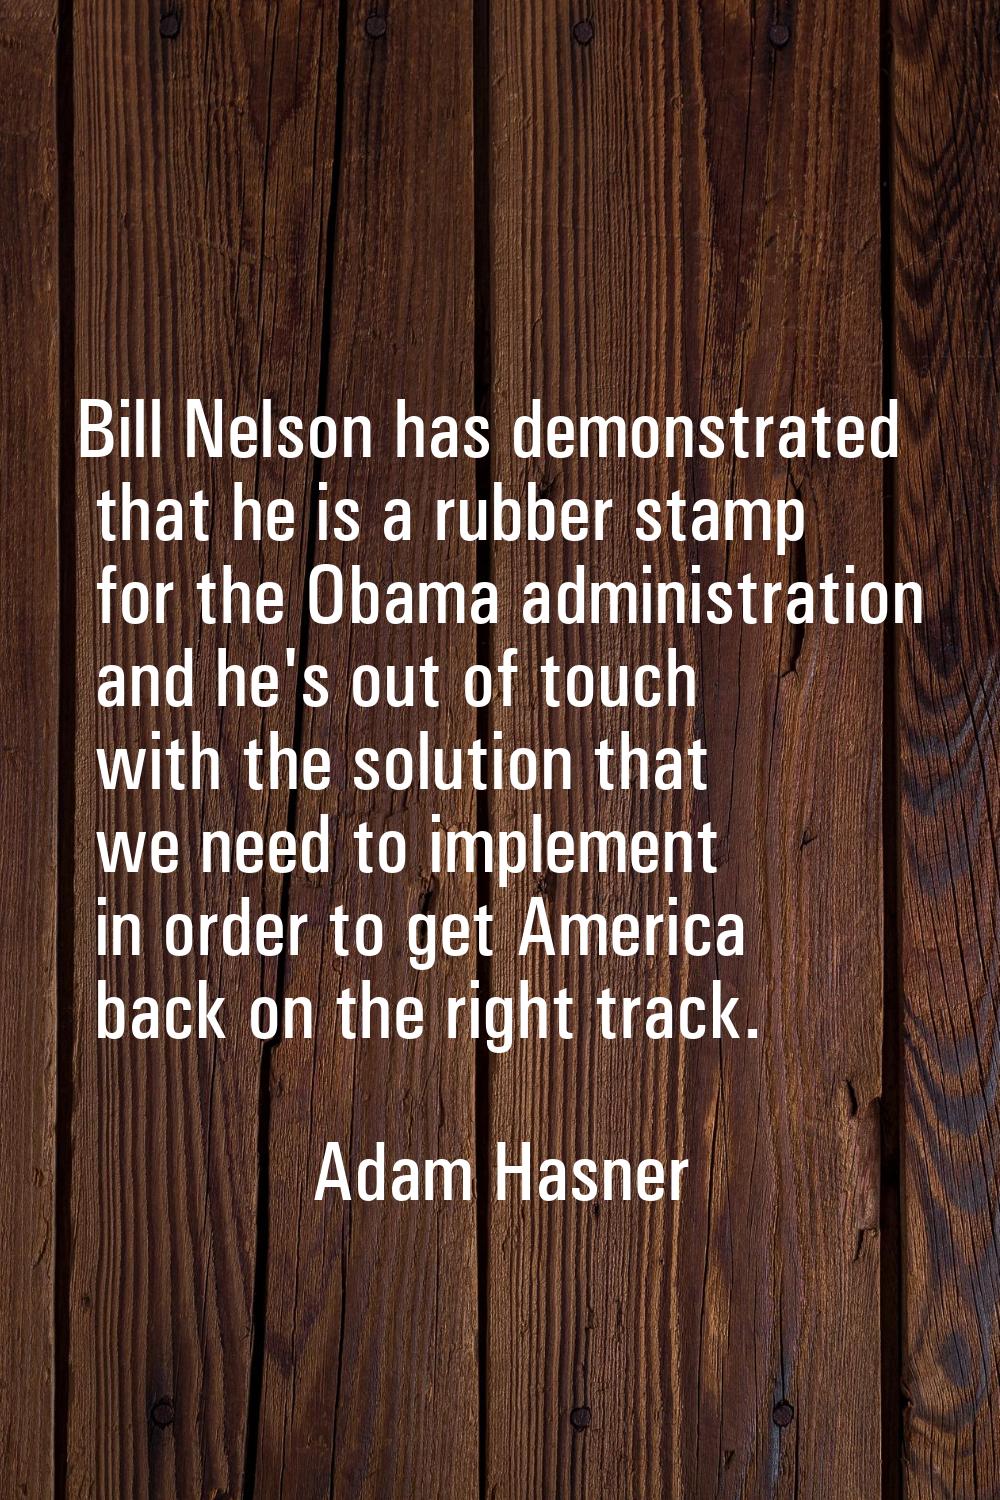 Bill Nelson has demonstrated that he is a rubber stamp for the Obama administration and he's out of